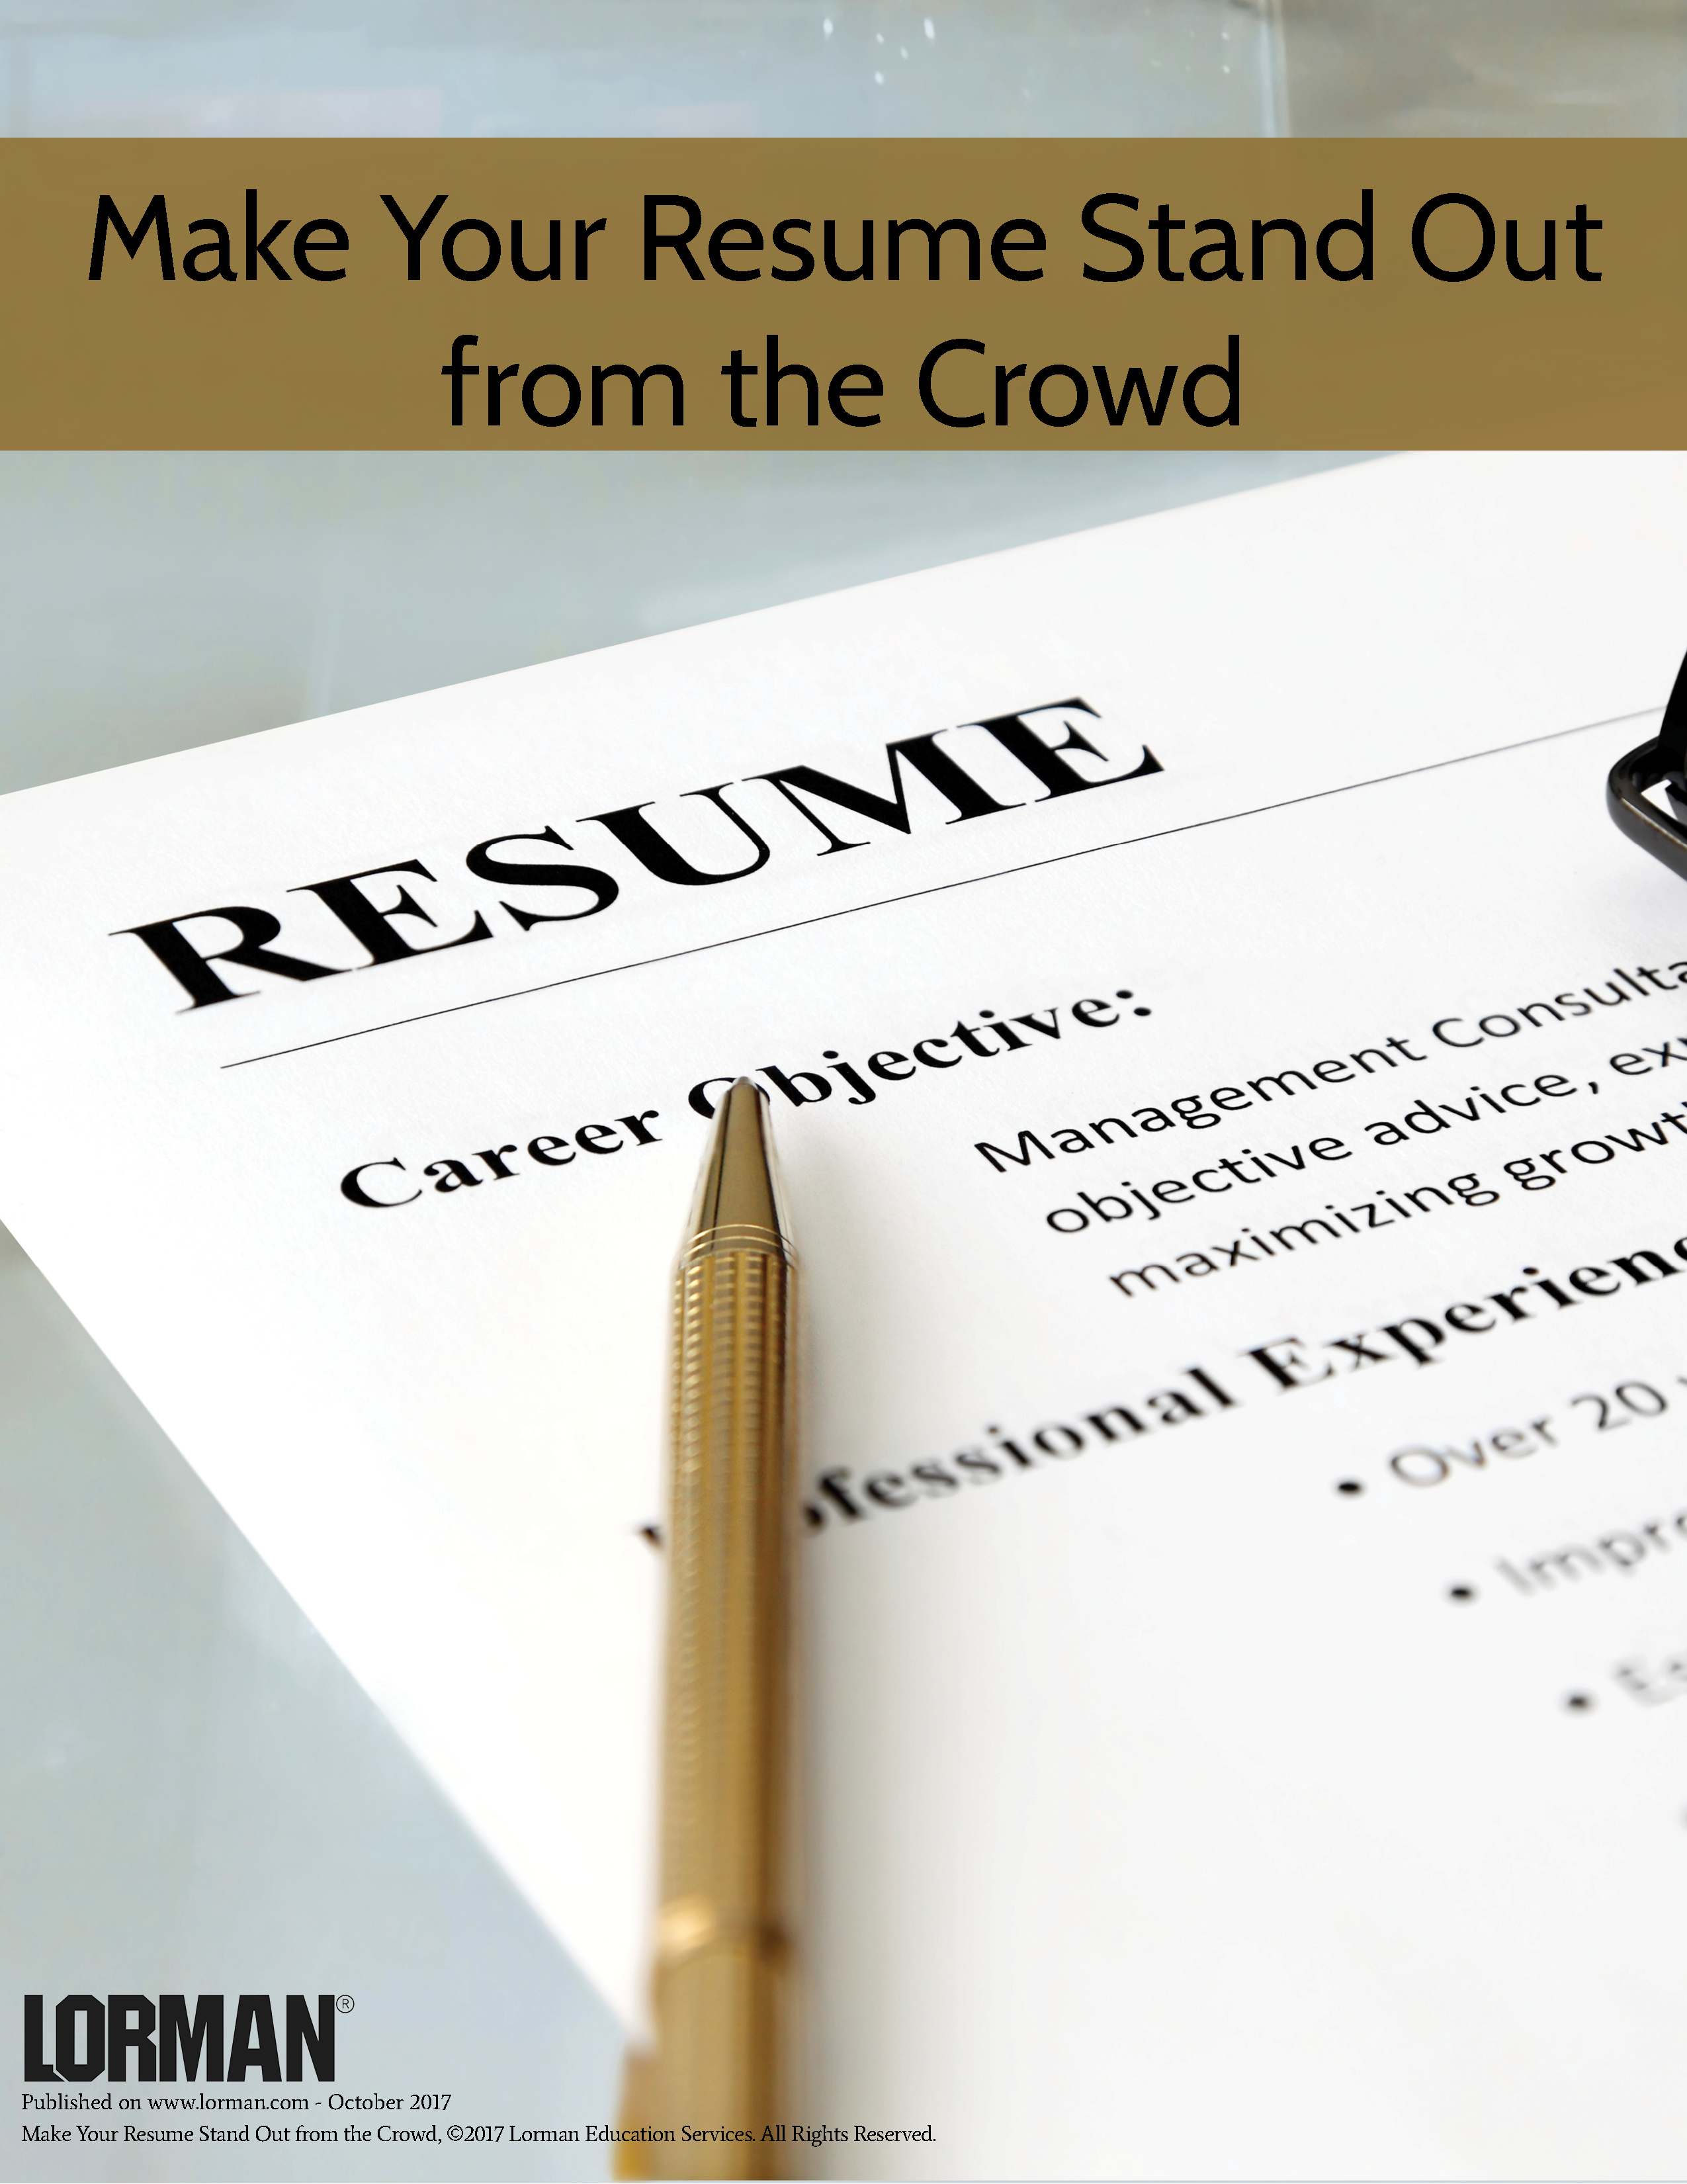 Make Your Resume Stand Out from the Crowd